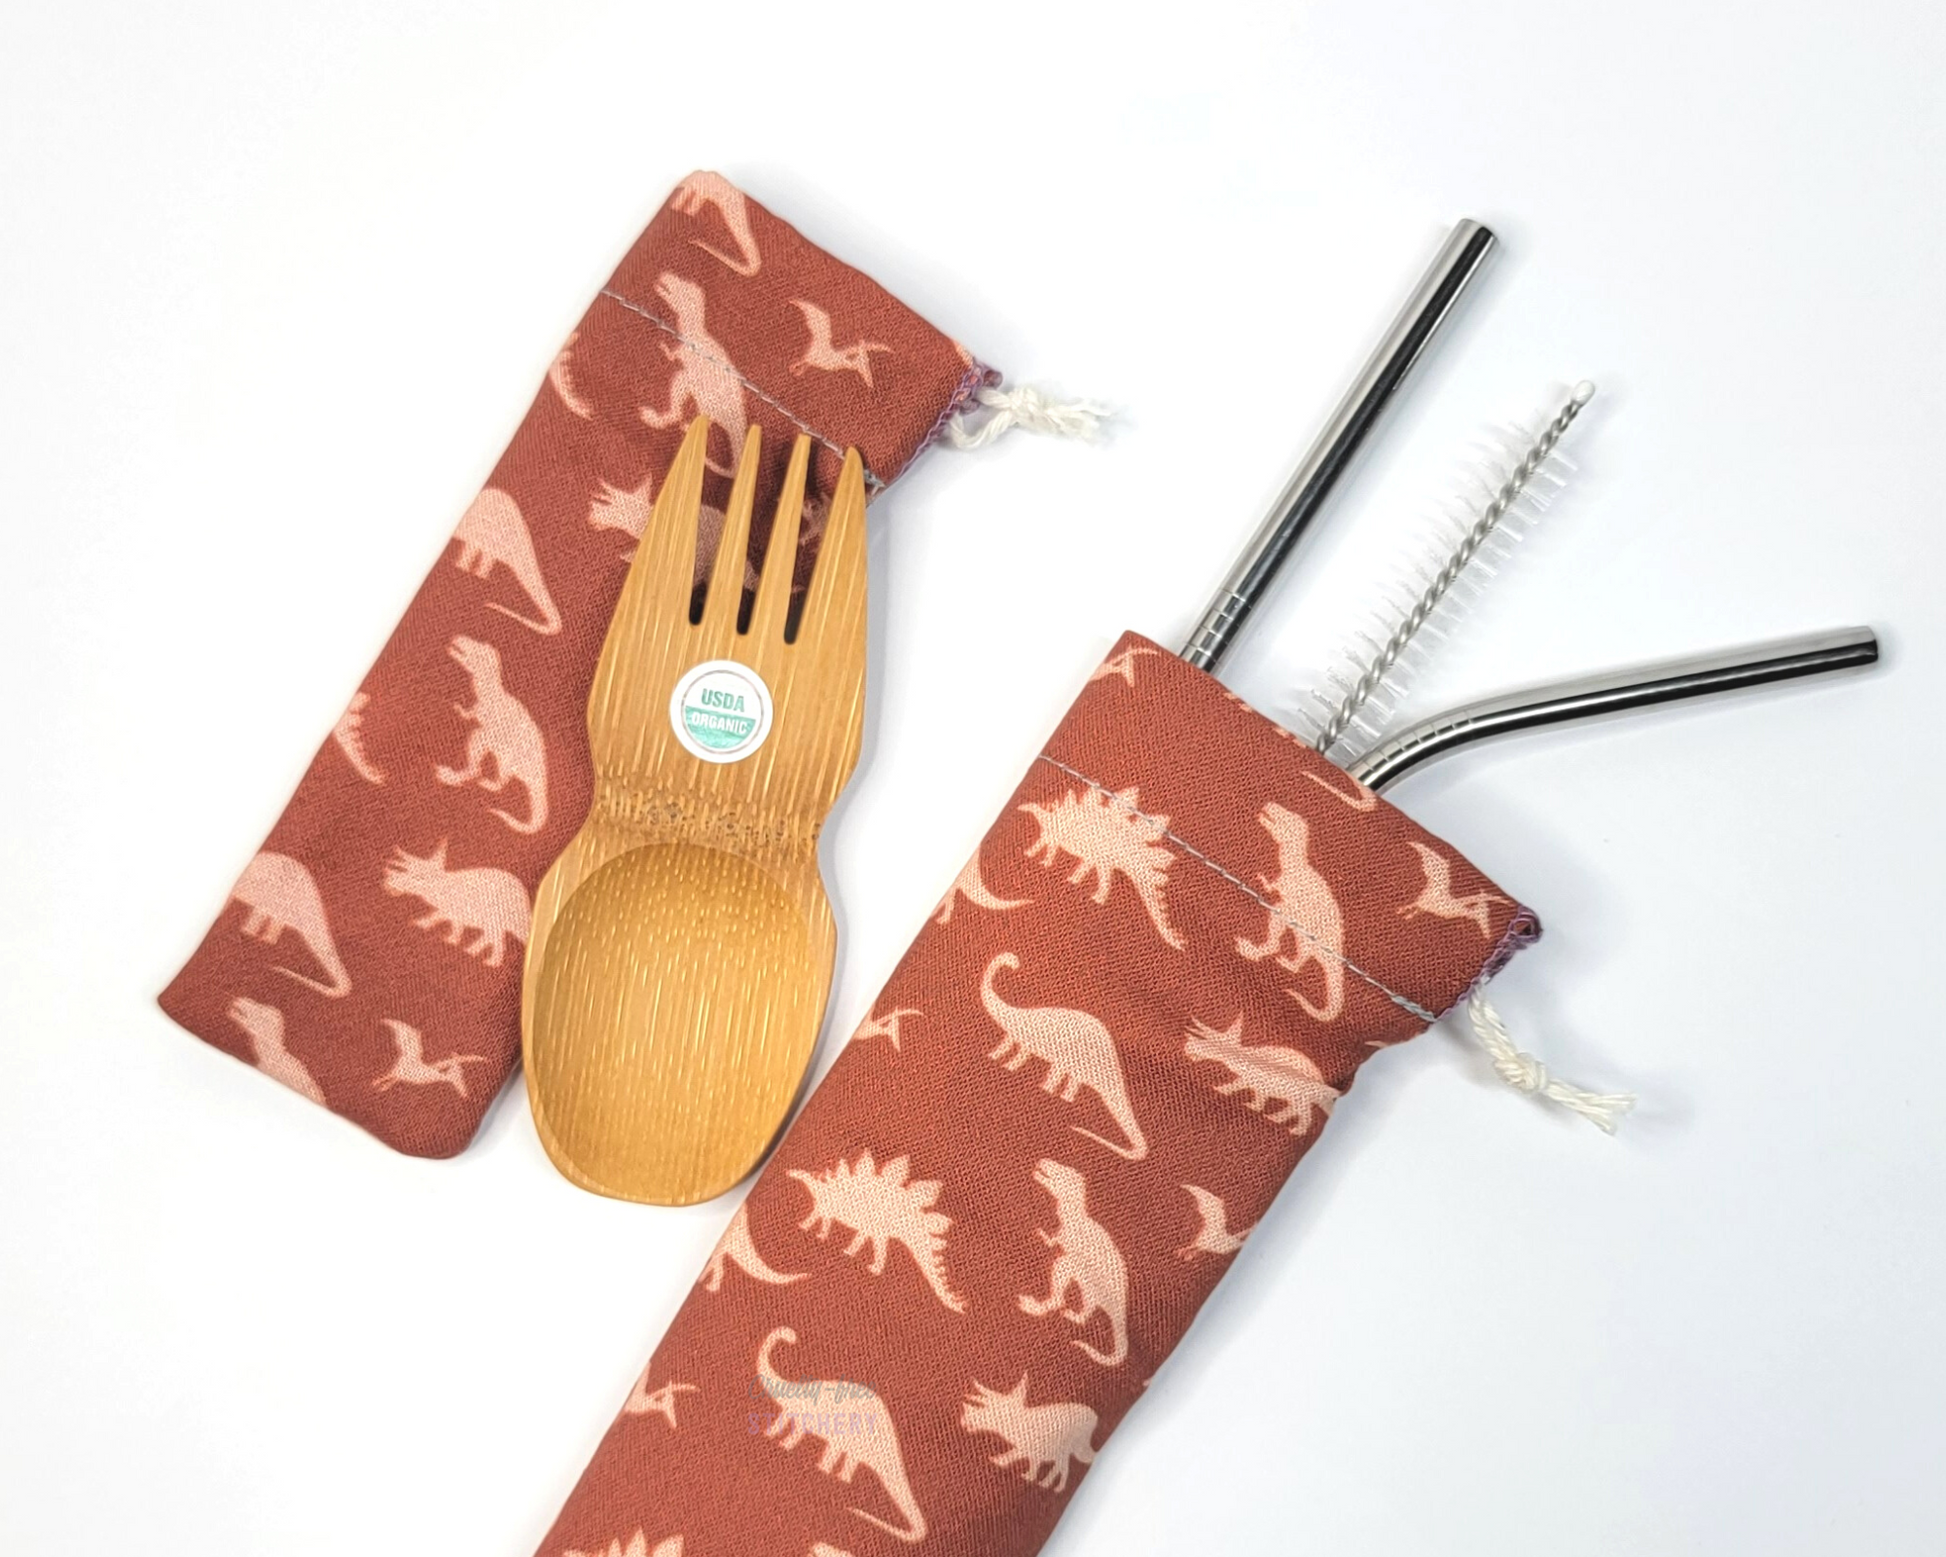 Reusable bamboo spork and stainless steel straw pouch set. The pouches are both dark orange with light orange dinosaurs.